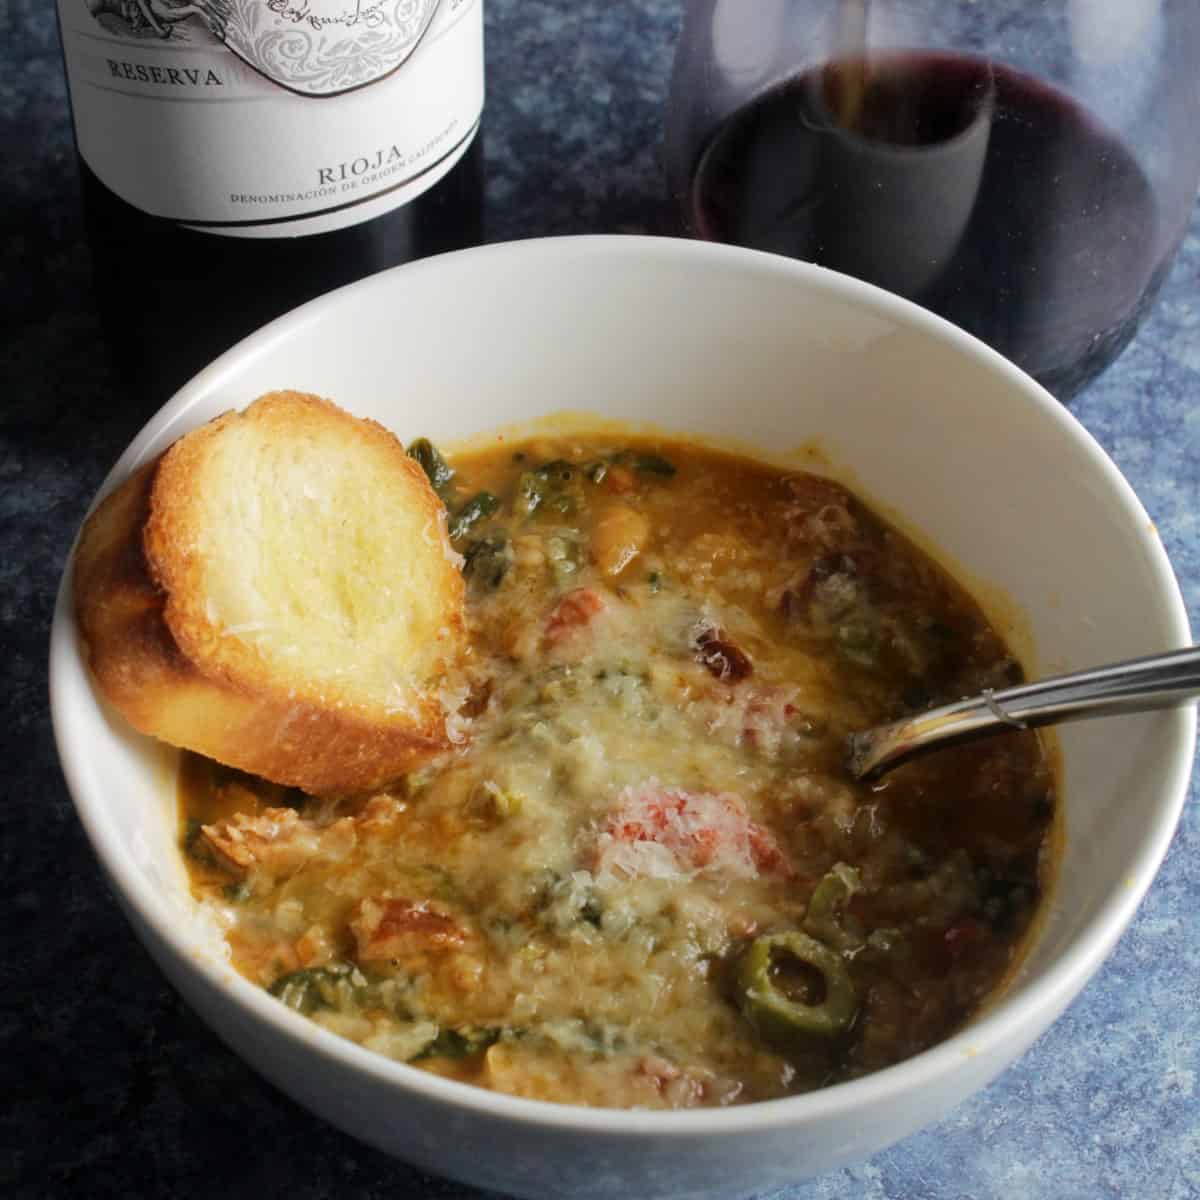 bowl of white bean soup with sausage, garlic bread and a glass of Rioja wine.